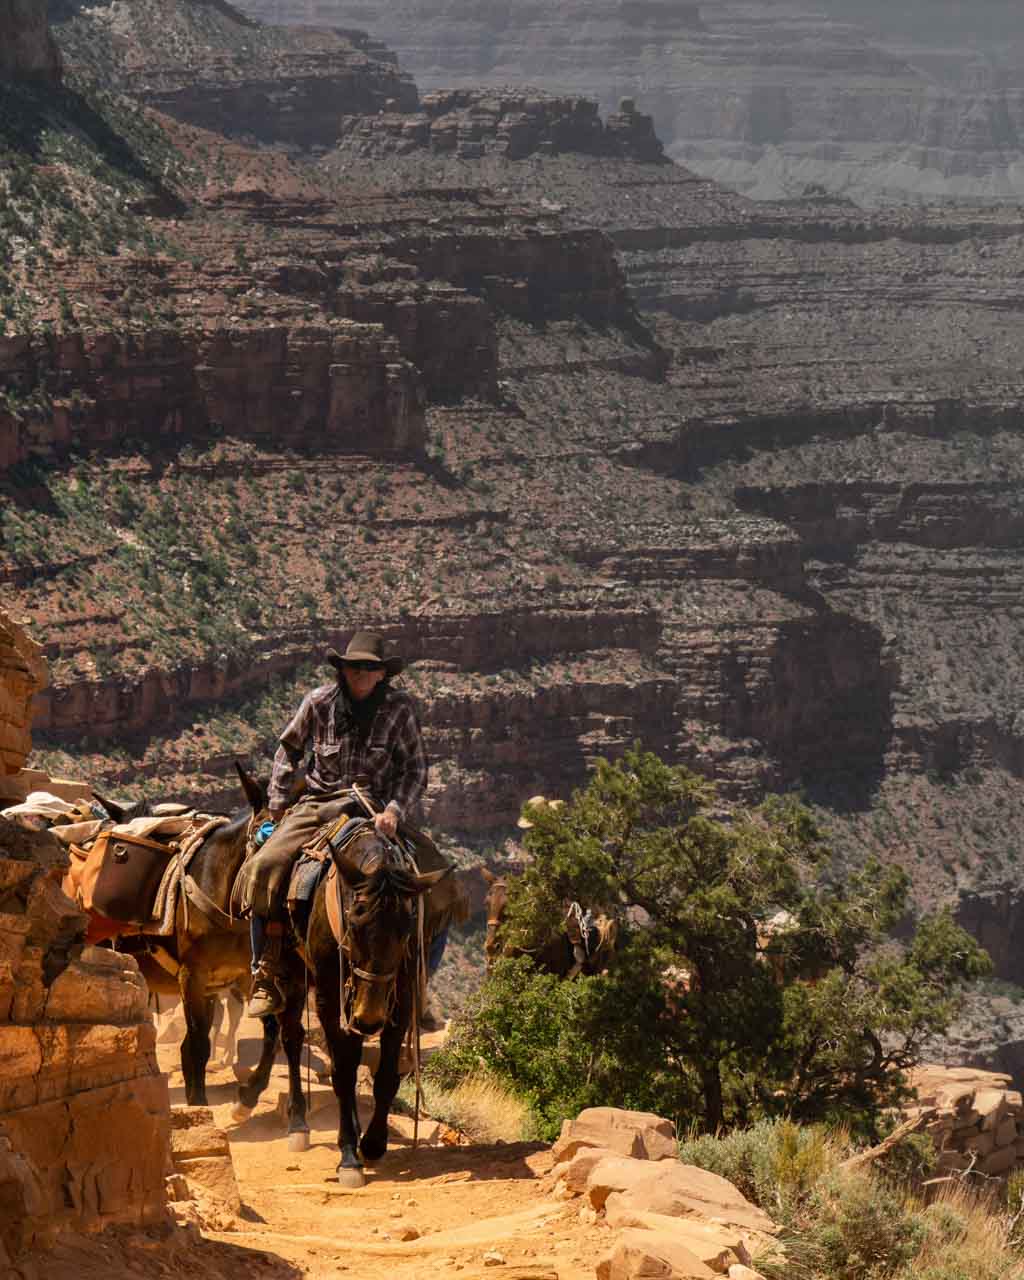 Horseman in the Grand Canyon, Arizona - Hiking Etiquette Right of Way Rules